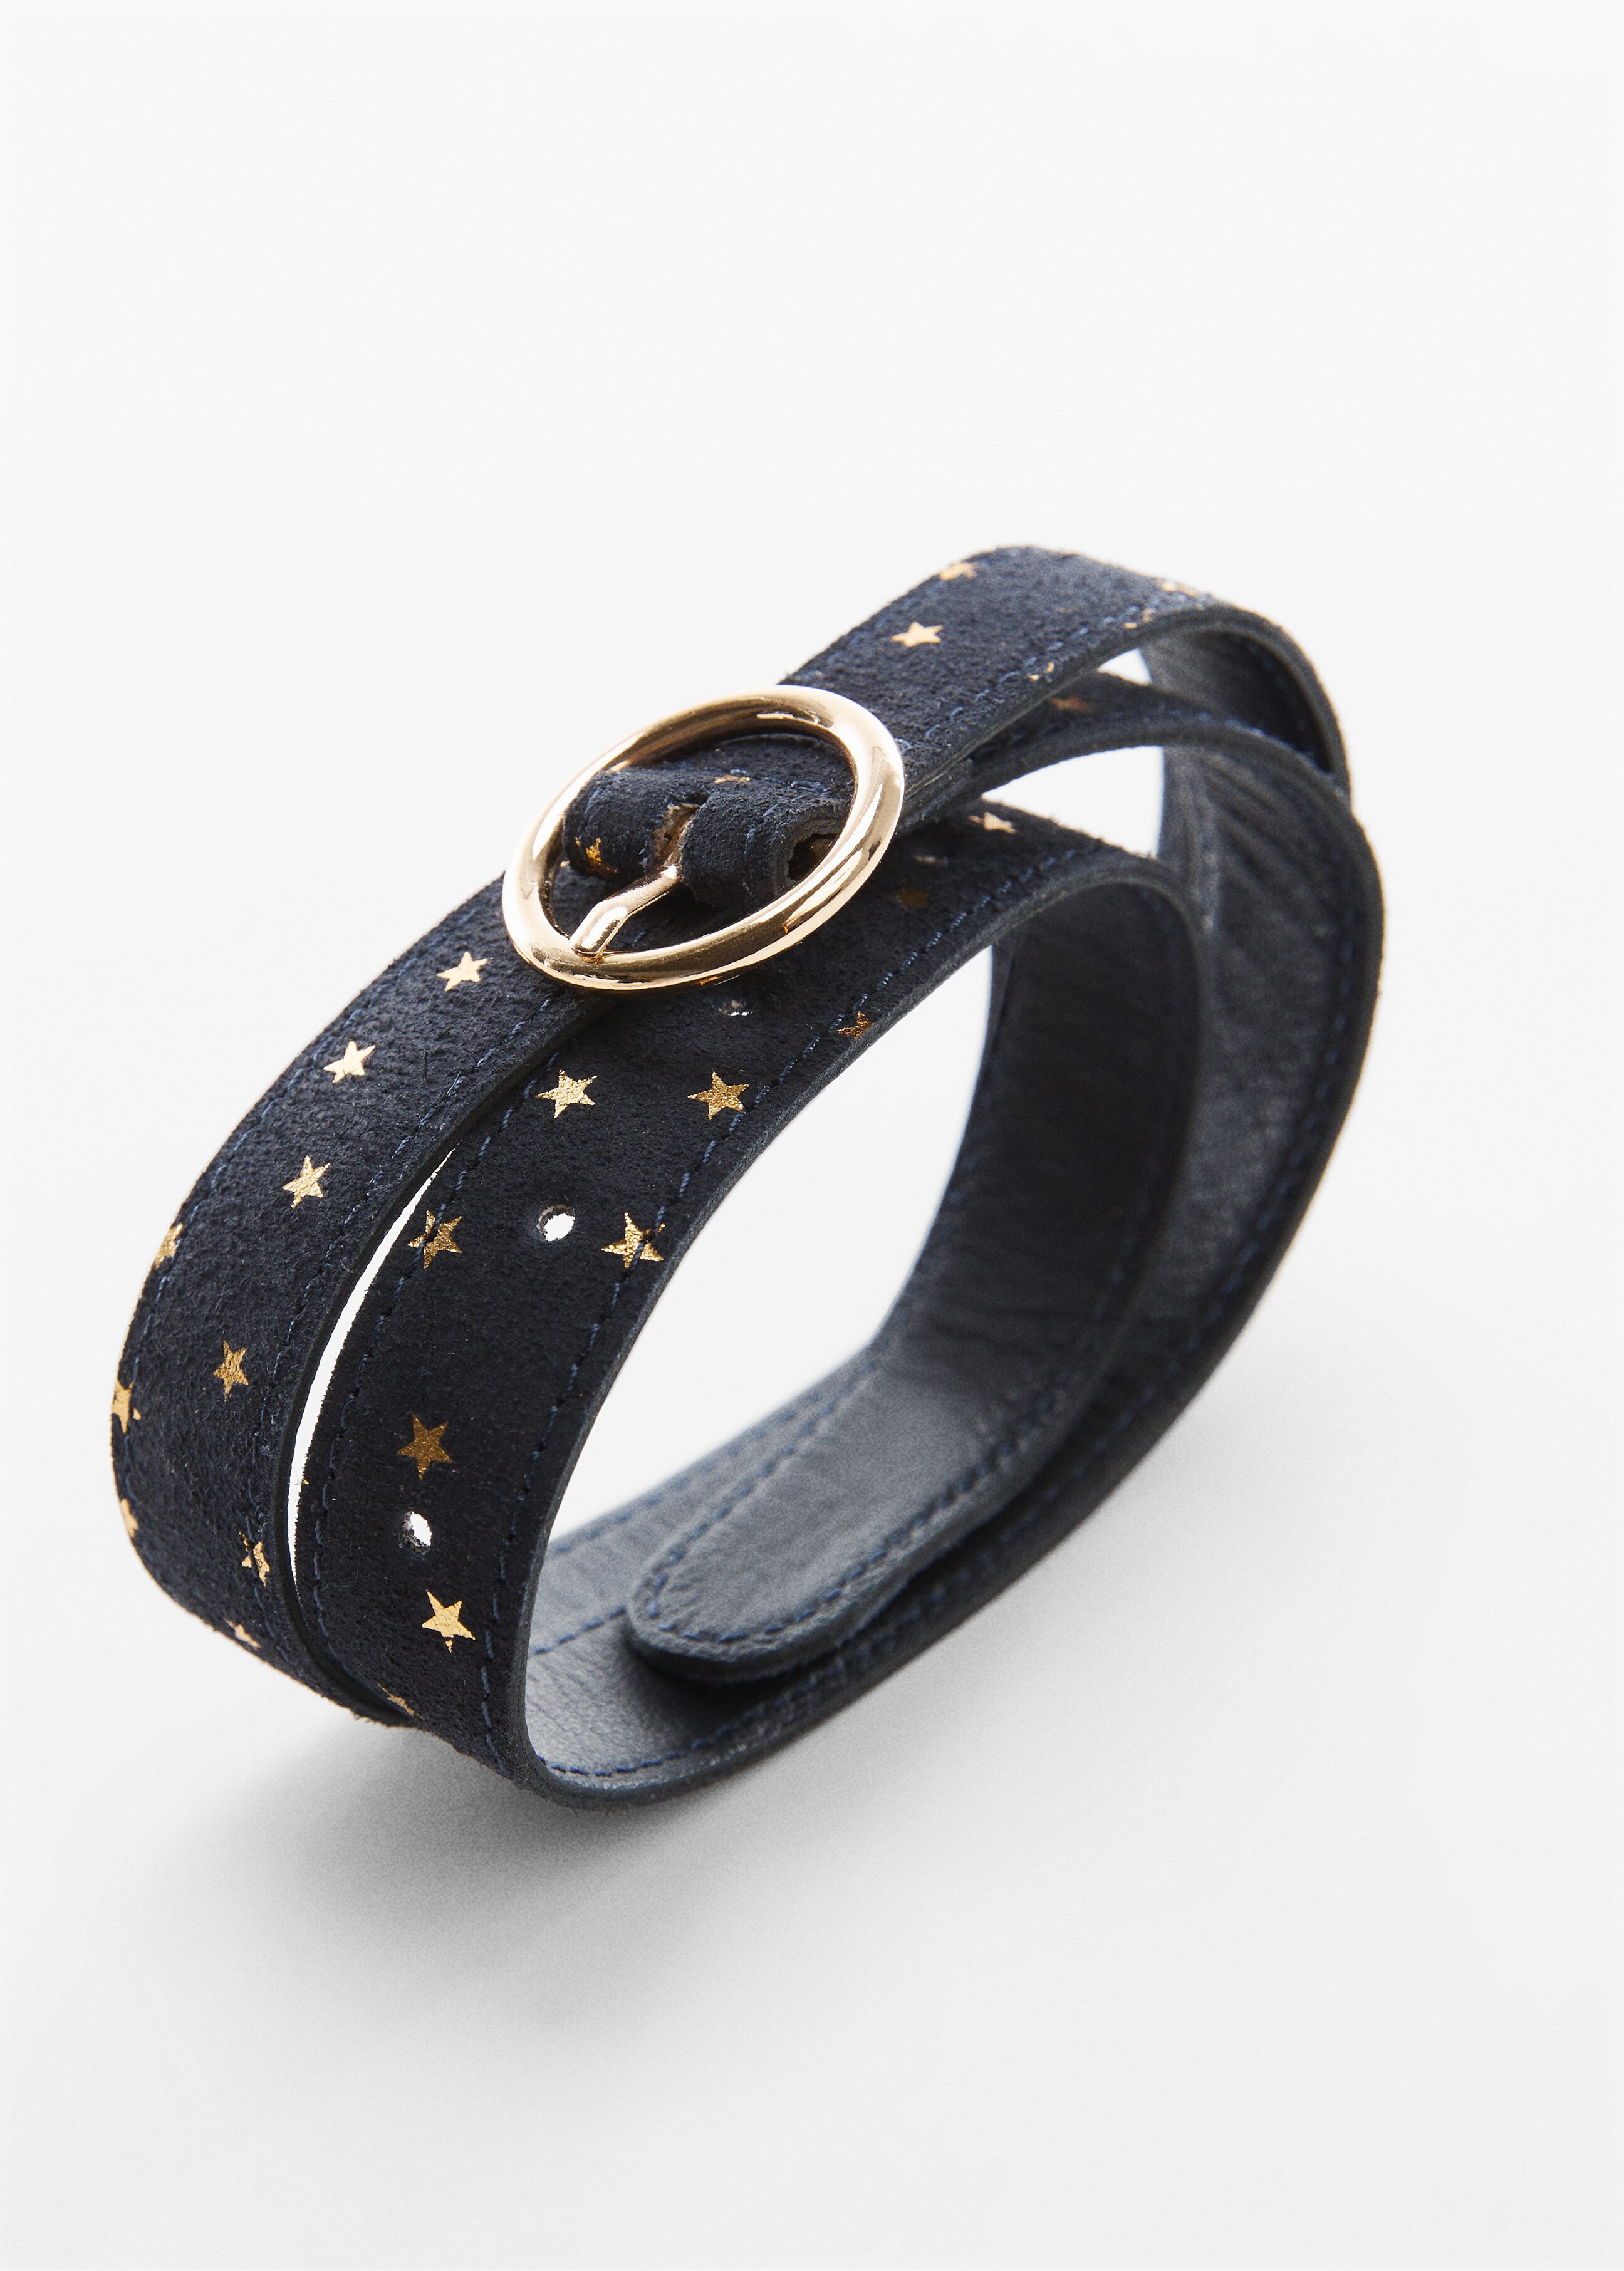 Stars leather belt - Details of the article 1